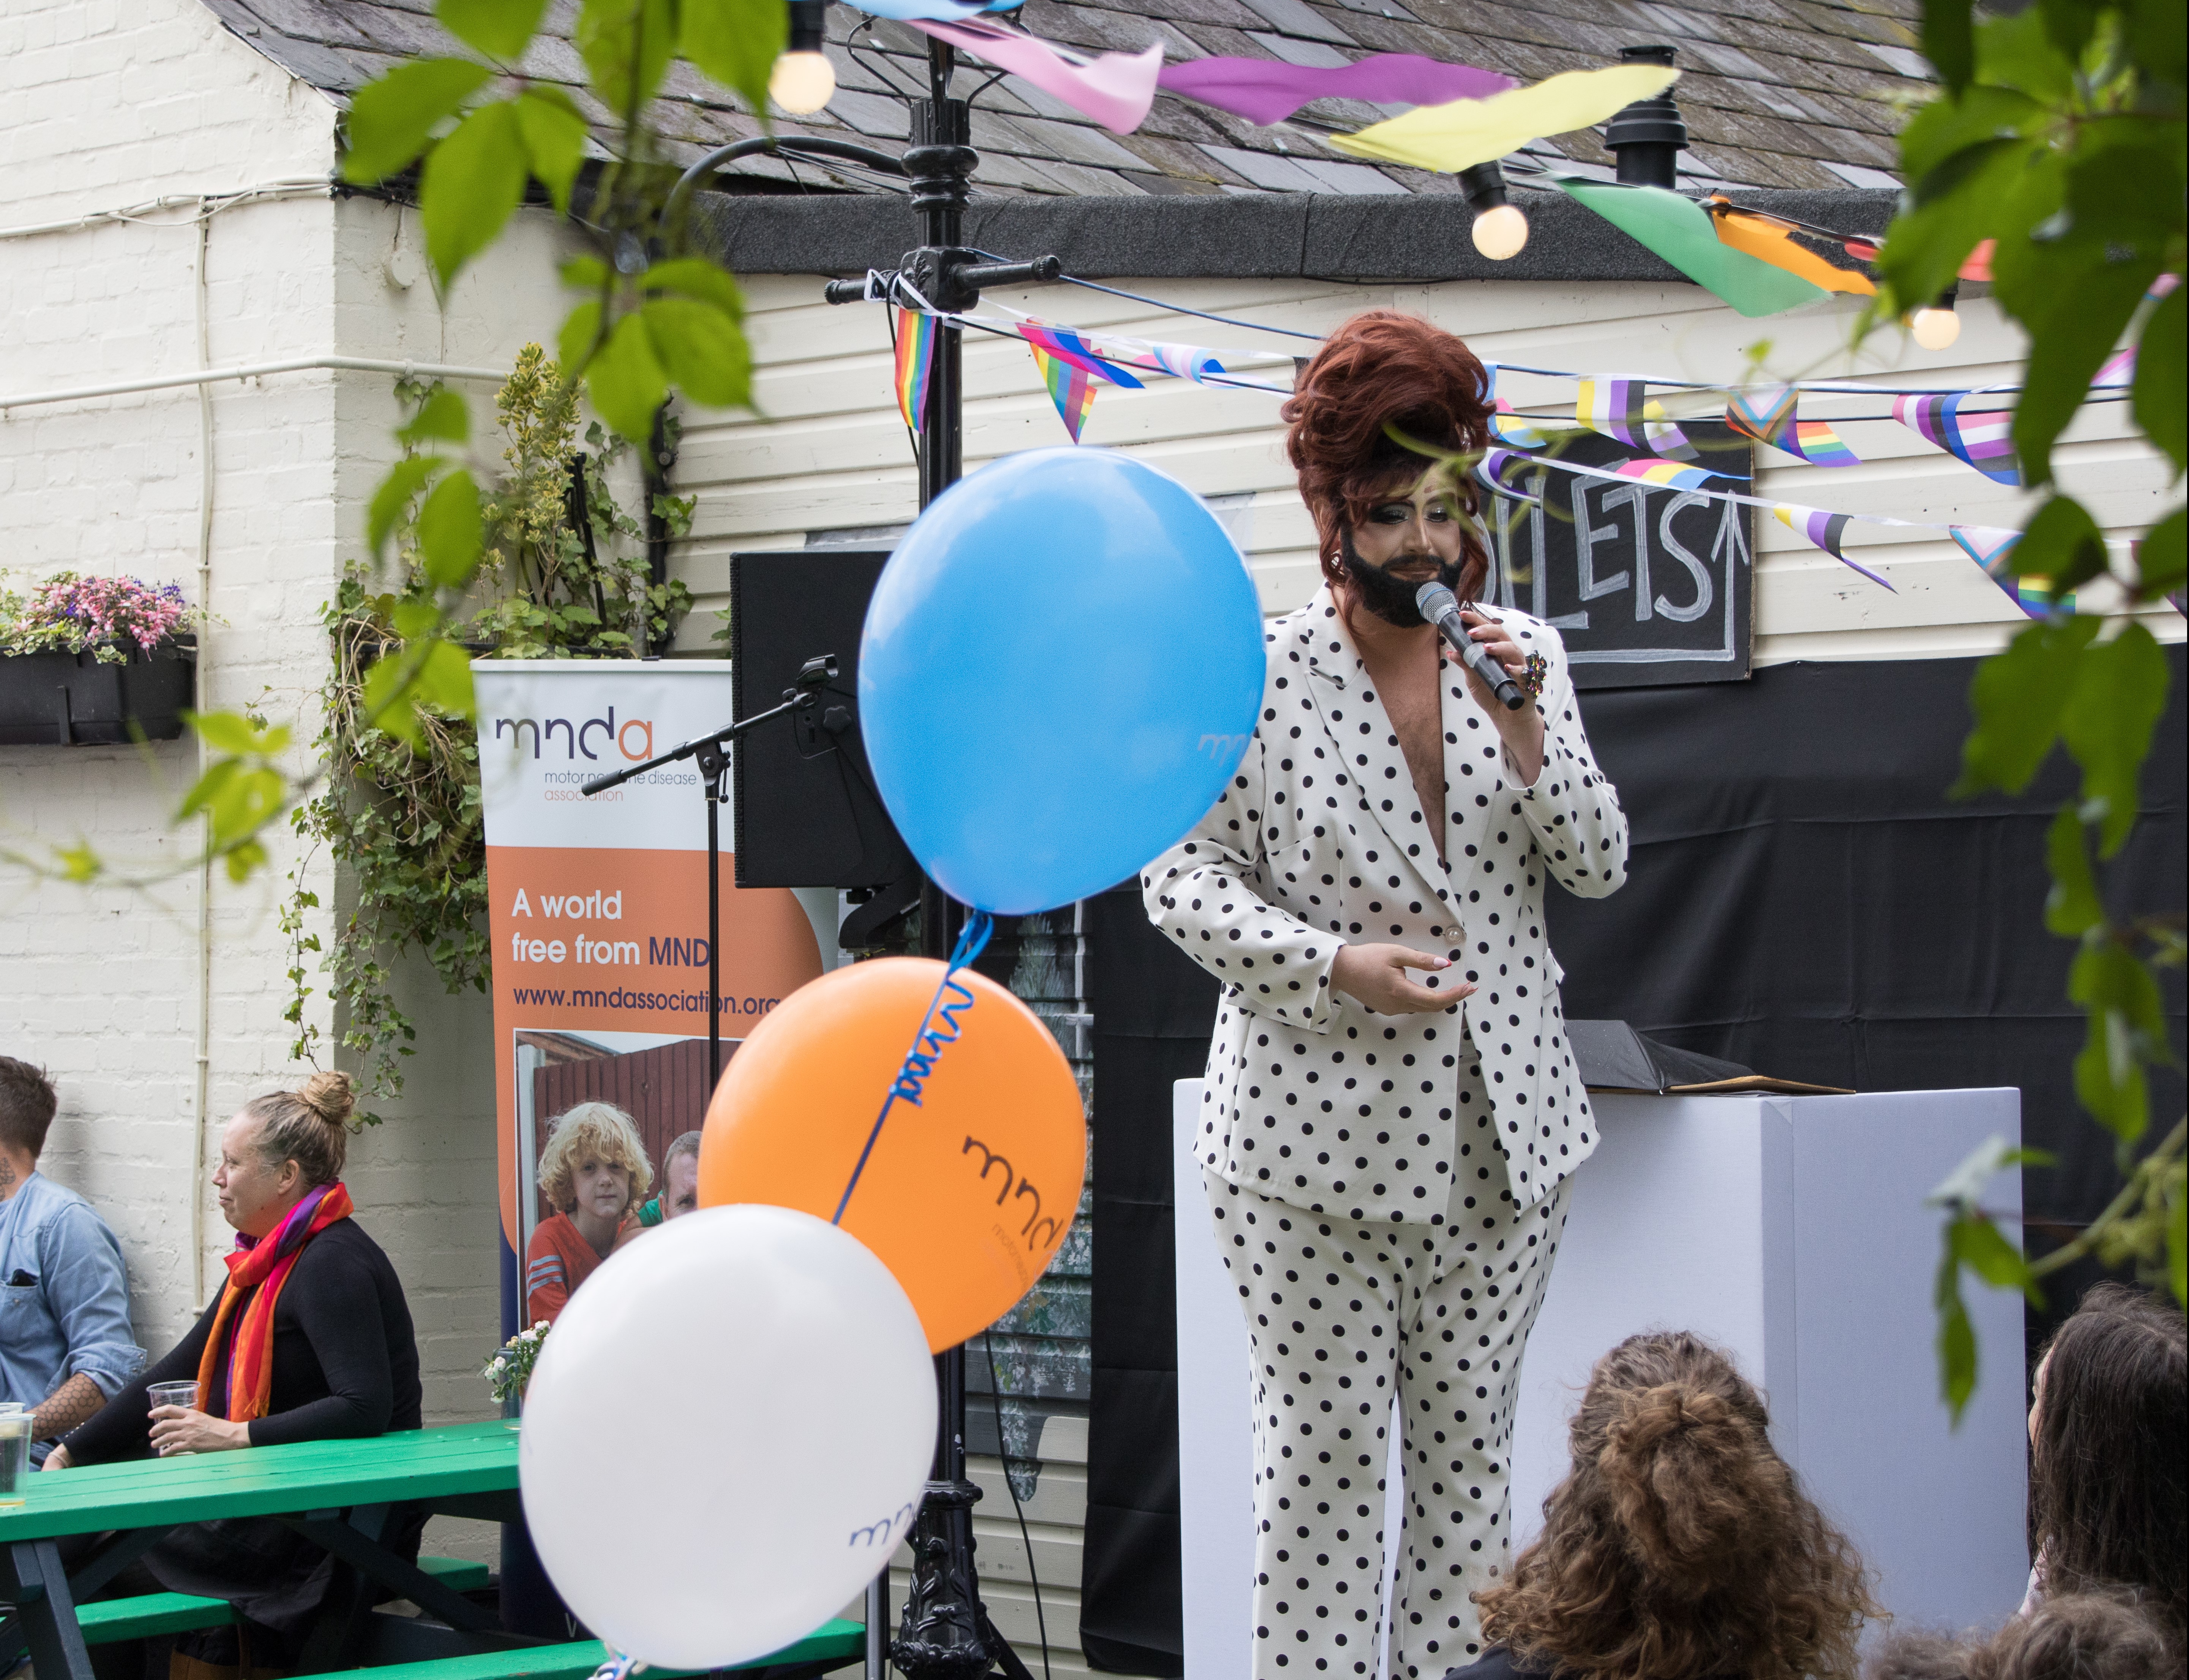 A Drag Queen performing at West London & Middlesex Branch's Walk Event